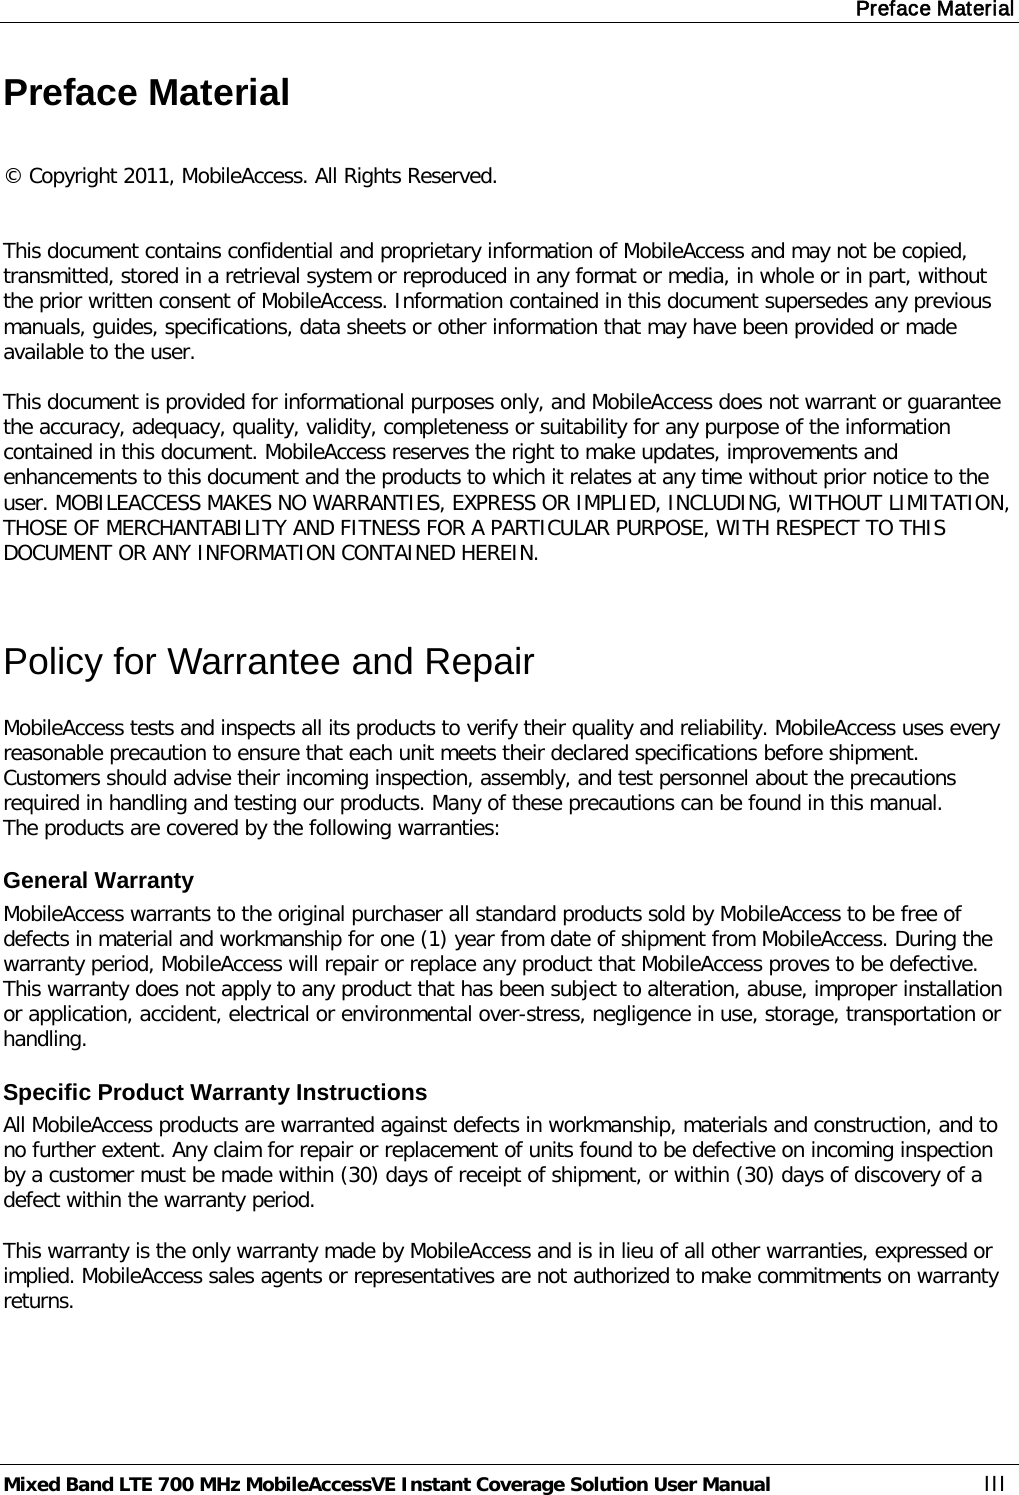 Preface Material Mixed Band LTE 700 MHz MobileAccessVE Instant Coverage Solution User Manual  III Preface Material  © Copyright 2011, MobileAccess. All Rights Reserved.   This document contains confidential and proprietary information of MobileAccess and may not be copied, transmitted, stored in a retrieval system or reproduced in any format or media, in whole or in part, without the prior written consent of MobileAccess. Information contained in this document supersedes any previous manuals, guides, specifications, data sheets or other information that may have been provided or made available to the user.   This document is provided for informational purposes only, and MobileAccess does not warrant or guarantee the accuracy, adequacy, quality, validity, completeness or suitability for any purpose of the information contained in this document. MobileAccess reserves the right to make updates, improvements and enhancements to this document and the products to which it relates at any time without prior notice to the user. MOBILEACCESS MAKES NO WARRANTIES, EXPRESS OR IMPLIED, INCLUDING, WITHOUT LIMITATION, THOSE OF MERCHANTABILITY AND FITNESS FOR A PARTICULAR PURPOSE, WITH RESPECT TO THIS DOCUMENT OR ANY INFORMATION CONTAINED HEREIN.  Policy for Warrantee and Repair MobileAccess tests and inspects all its products to verify their quality and reliability. MobileAccess uses every reasonable precaution to ensure that each unit meets their declared specifications before shipment. Customers should advise their incoming inspection, assembly, and test personnel about the precautions required in handling and testing our products. Many of these precautions can be found in this manual. The products are covered by the following warranties: General Warranty MobileAccess warrants to the original purchaser all standard products sold by MobileAccess to be free of defects in material and workmanship for one (1) year from date of shipment from MobileAccess. During the warranty period, MobileAccess will repair or replace any product that MobileAccess proves to be defective. This warranty does not apply to any product that has been subject to alteration, abuse, improper installation or application, accident, electrical or environmental over-stress, negligence in use, storage, transportation or handling. Specific Product Warranty Instructions All MobileAccess products are warranted against defects in workmanship, materials and construction, and to no further extent. Any claim for repair or replacement of units found to be defective on incoming inspection by a customer must be made within (30) days of receipt of shipment, or within (30) days of discovery of a defect within the warranty period.  This warranty is the only warranty made by MobileAccess and is in lieu of all other warranties, expressed or implied. MobileAccess sales agents or representatives are not authorized to make commitments on warranty returns. 